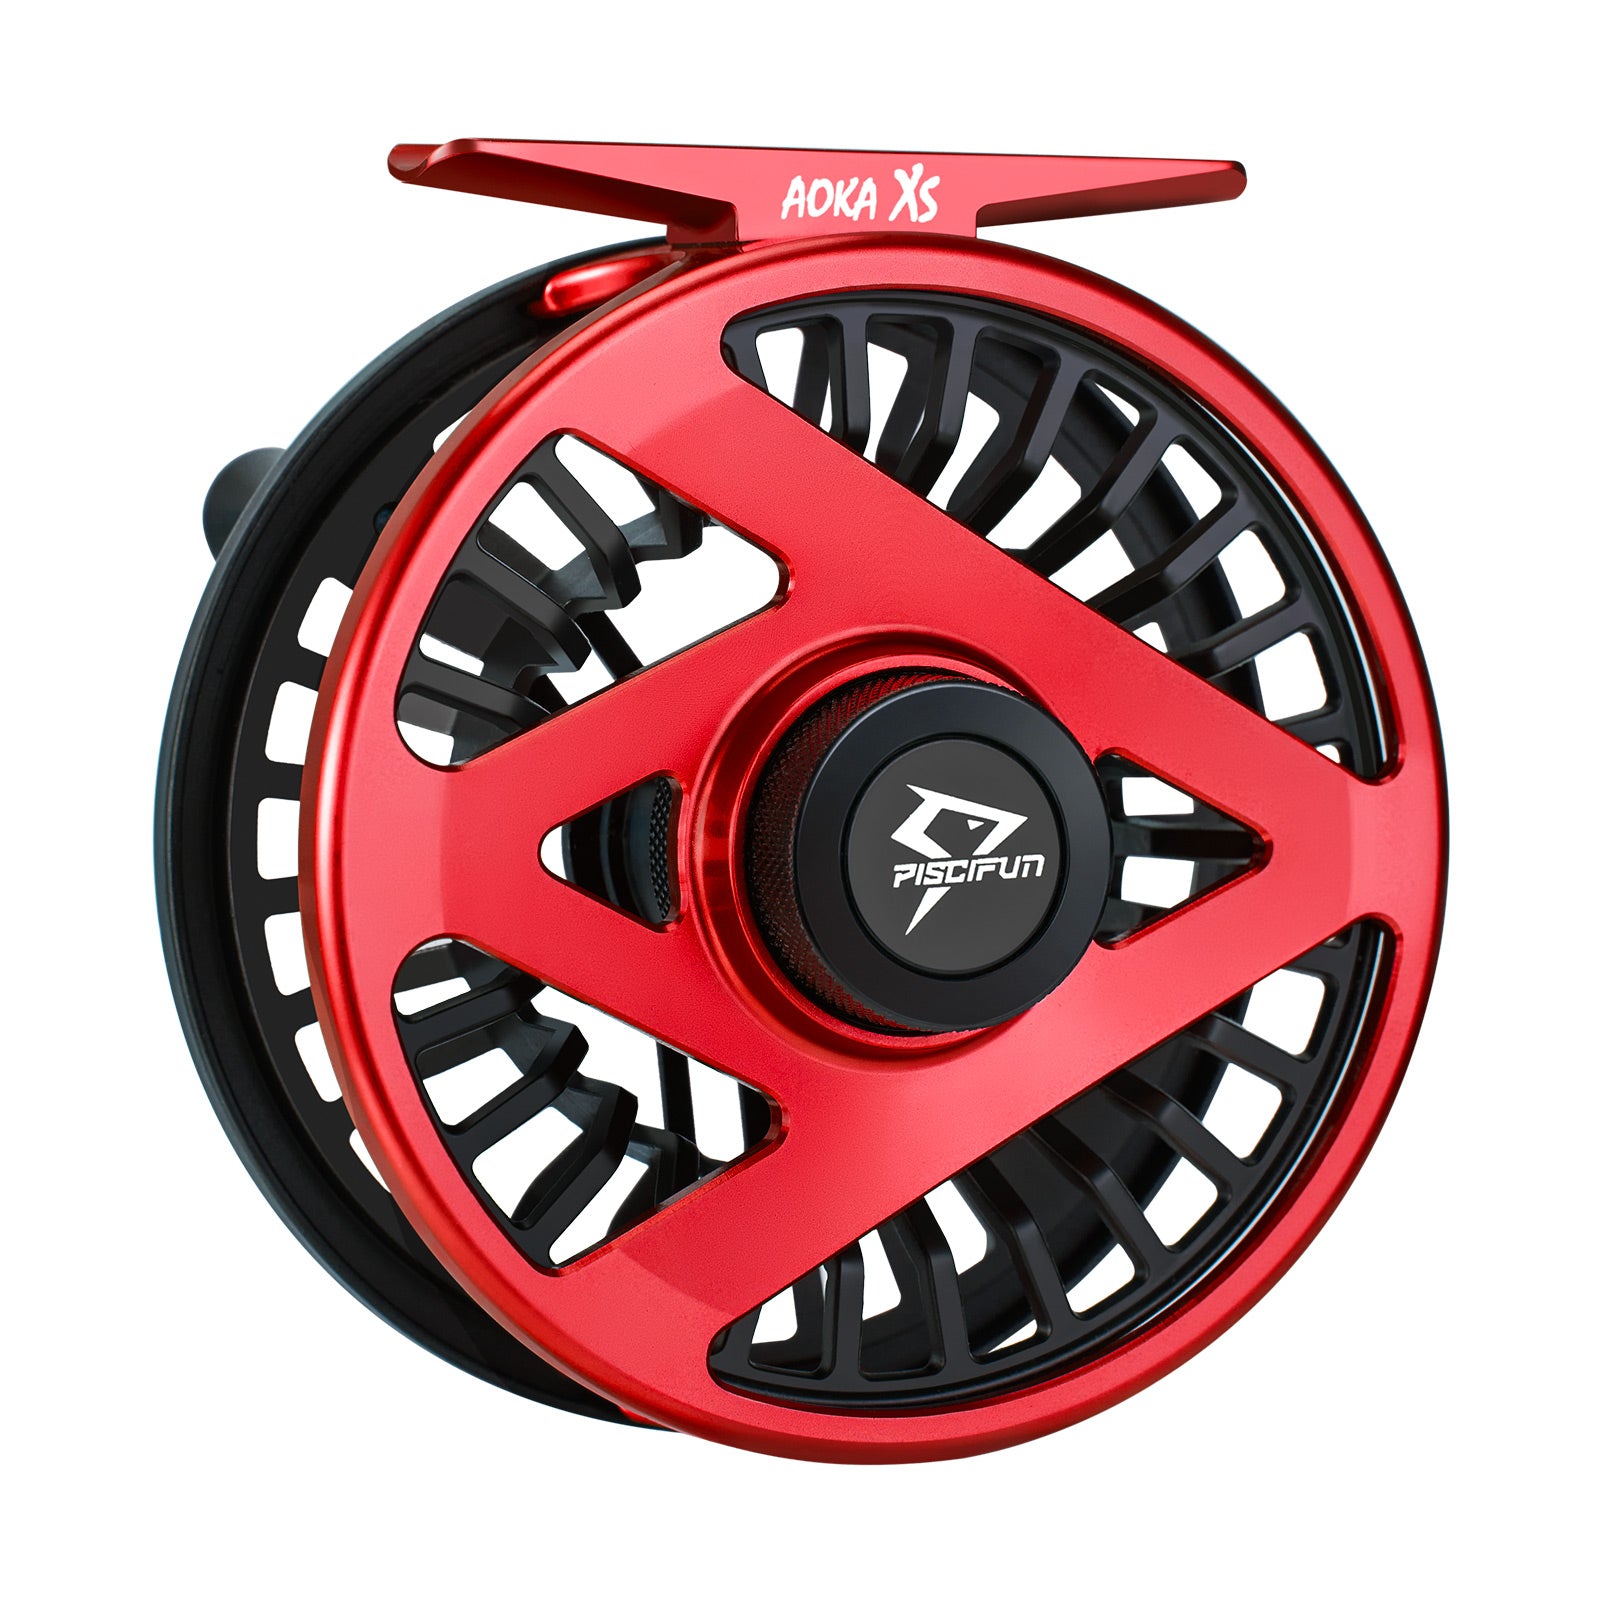 Piscifun® Aoka XS Fly Fishing Reel with Sealed Drag, CNC-machined Aluminum  Alloy Body Fly Reel